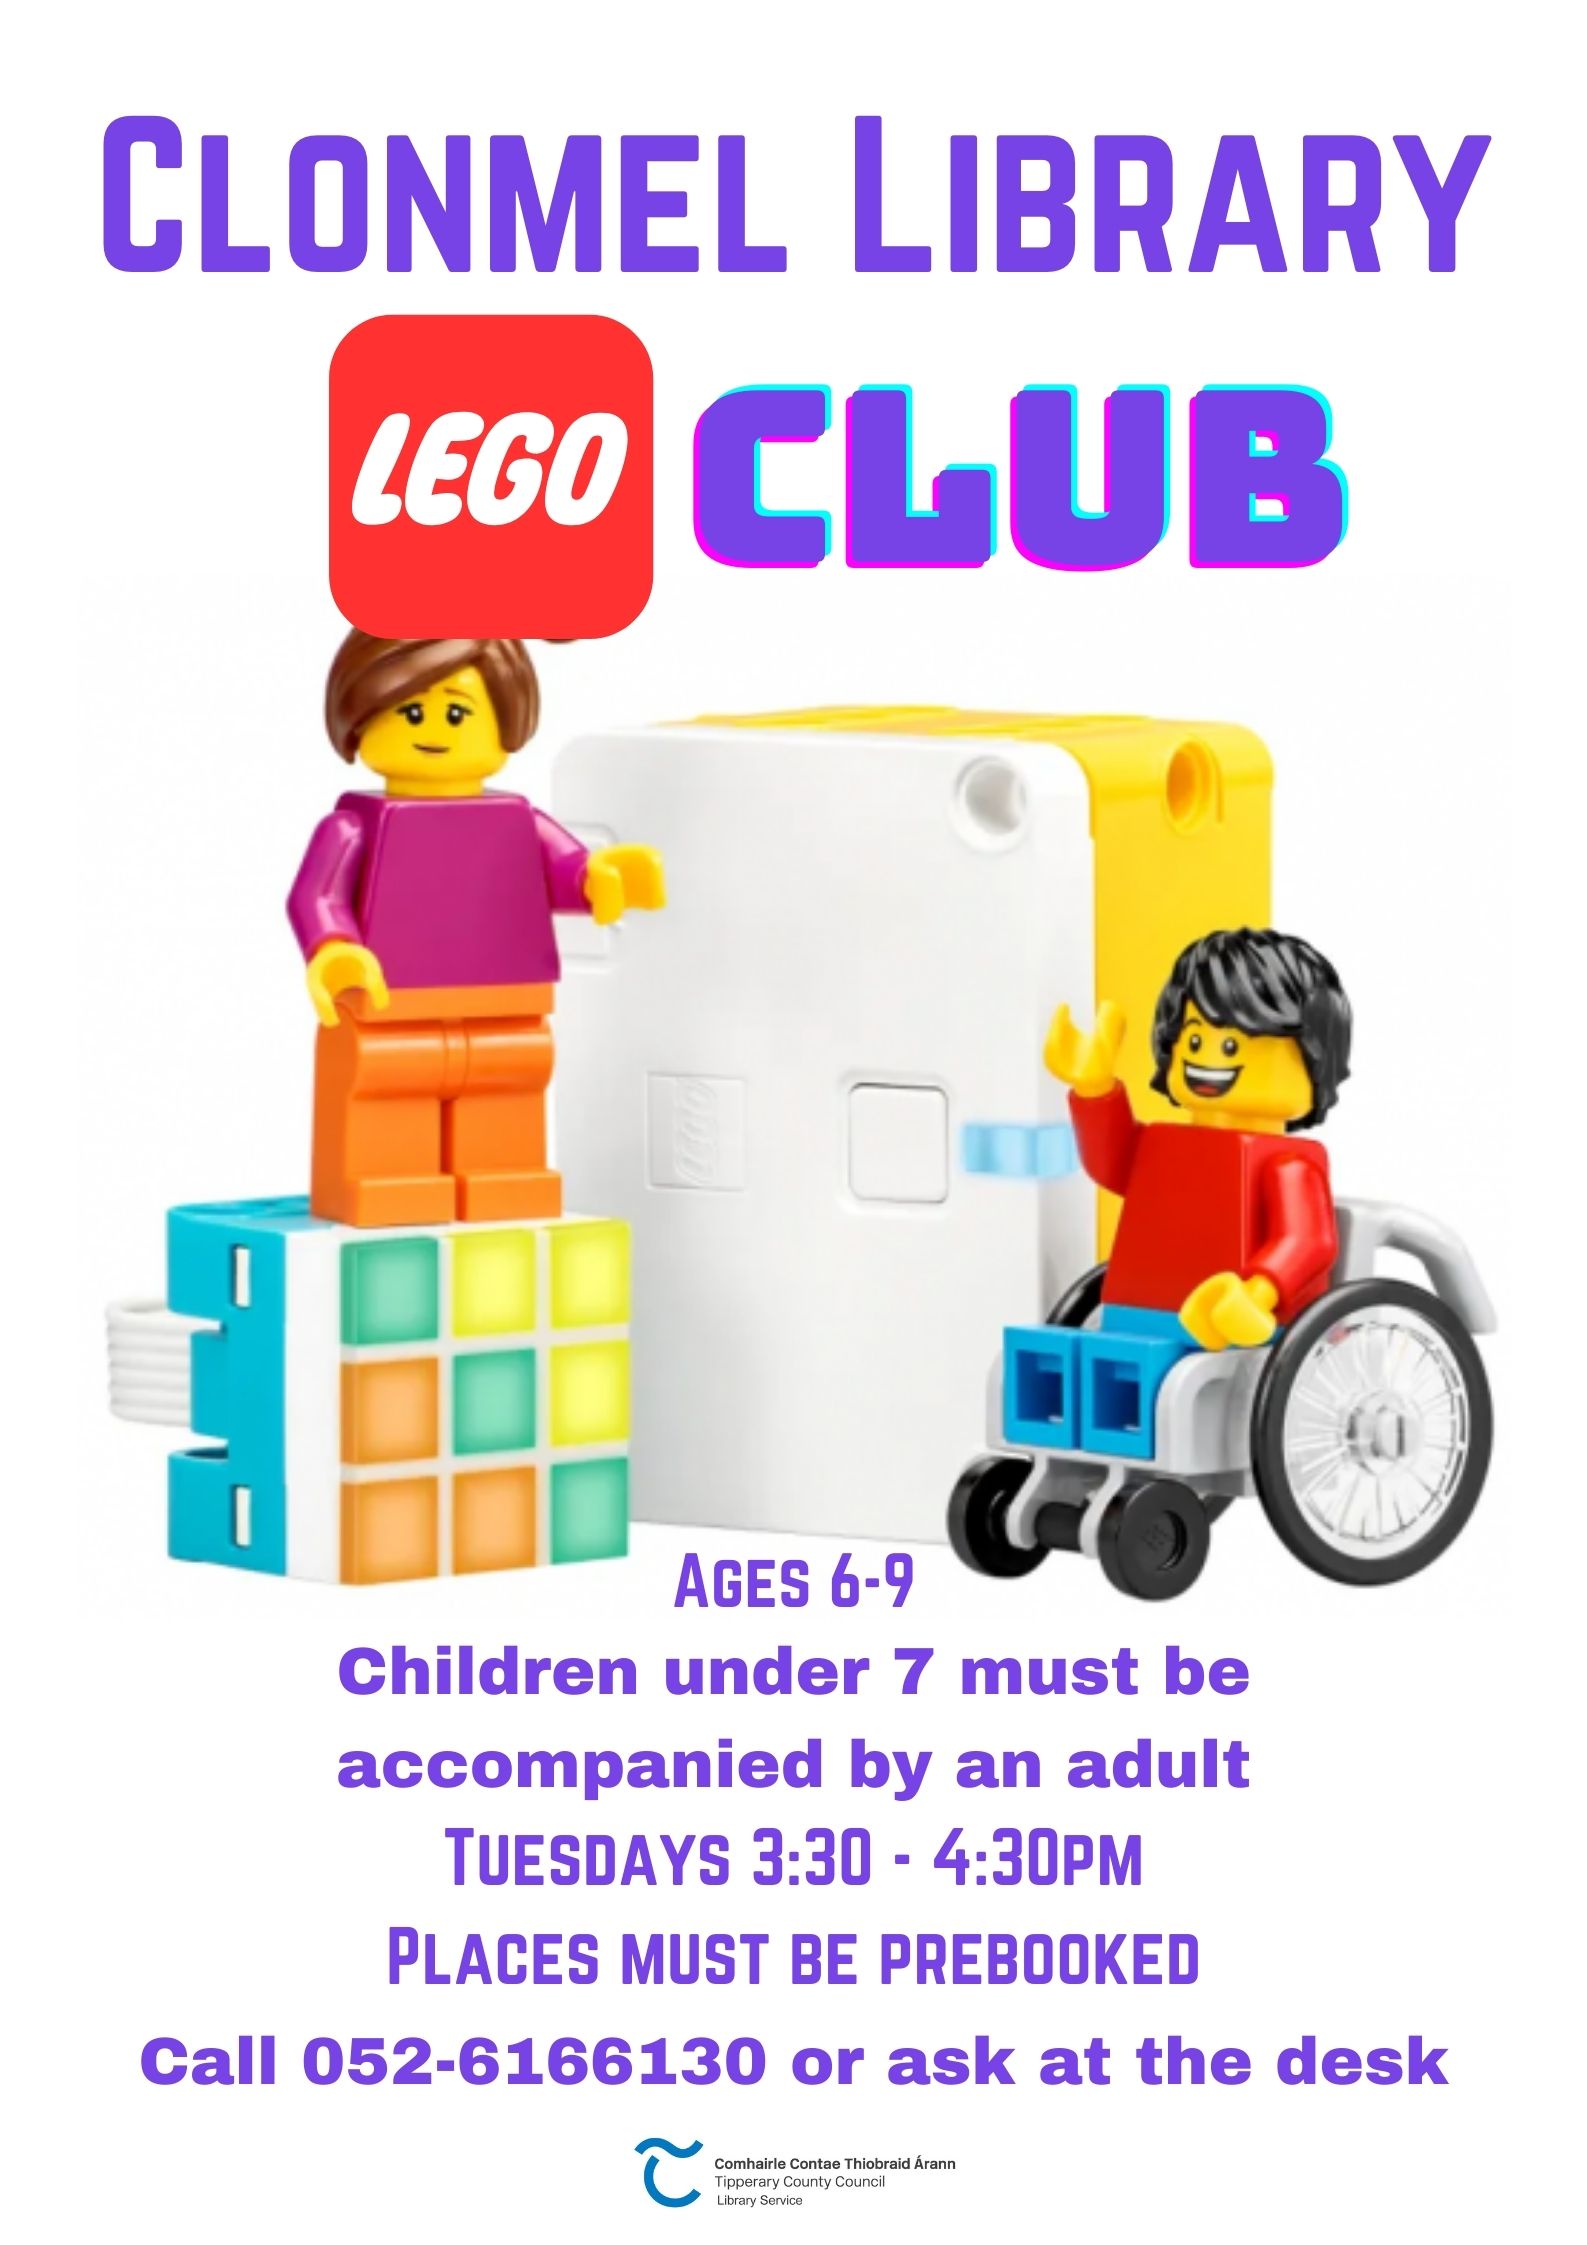 poster for lego club clonmel library every tuesday